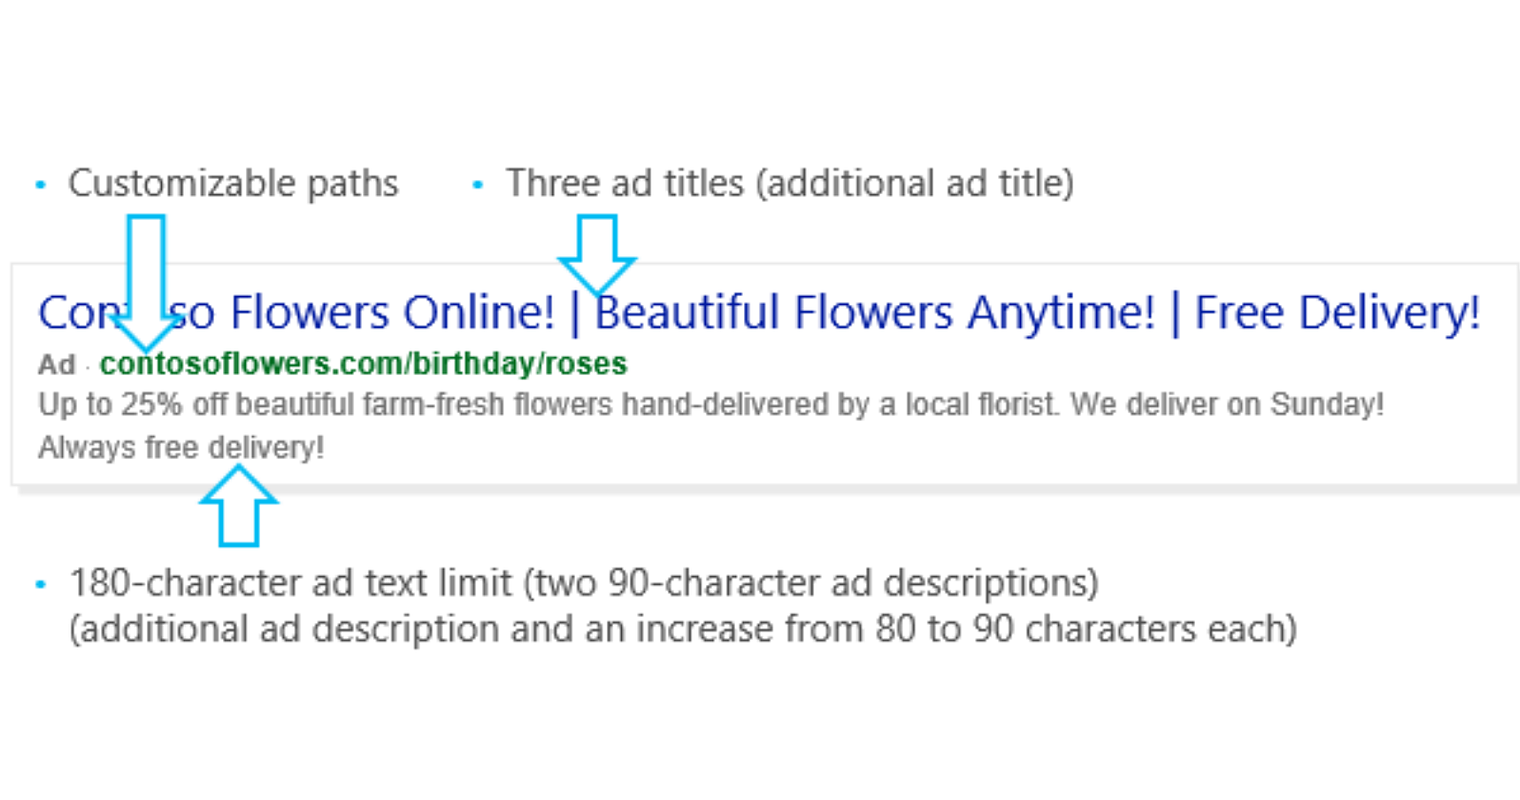 Bing Updates Expanded Text Ads With Ability to Add Even More Text